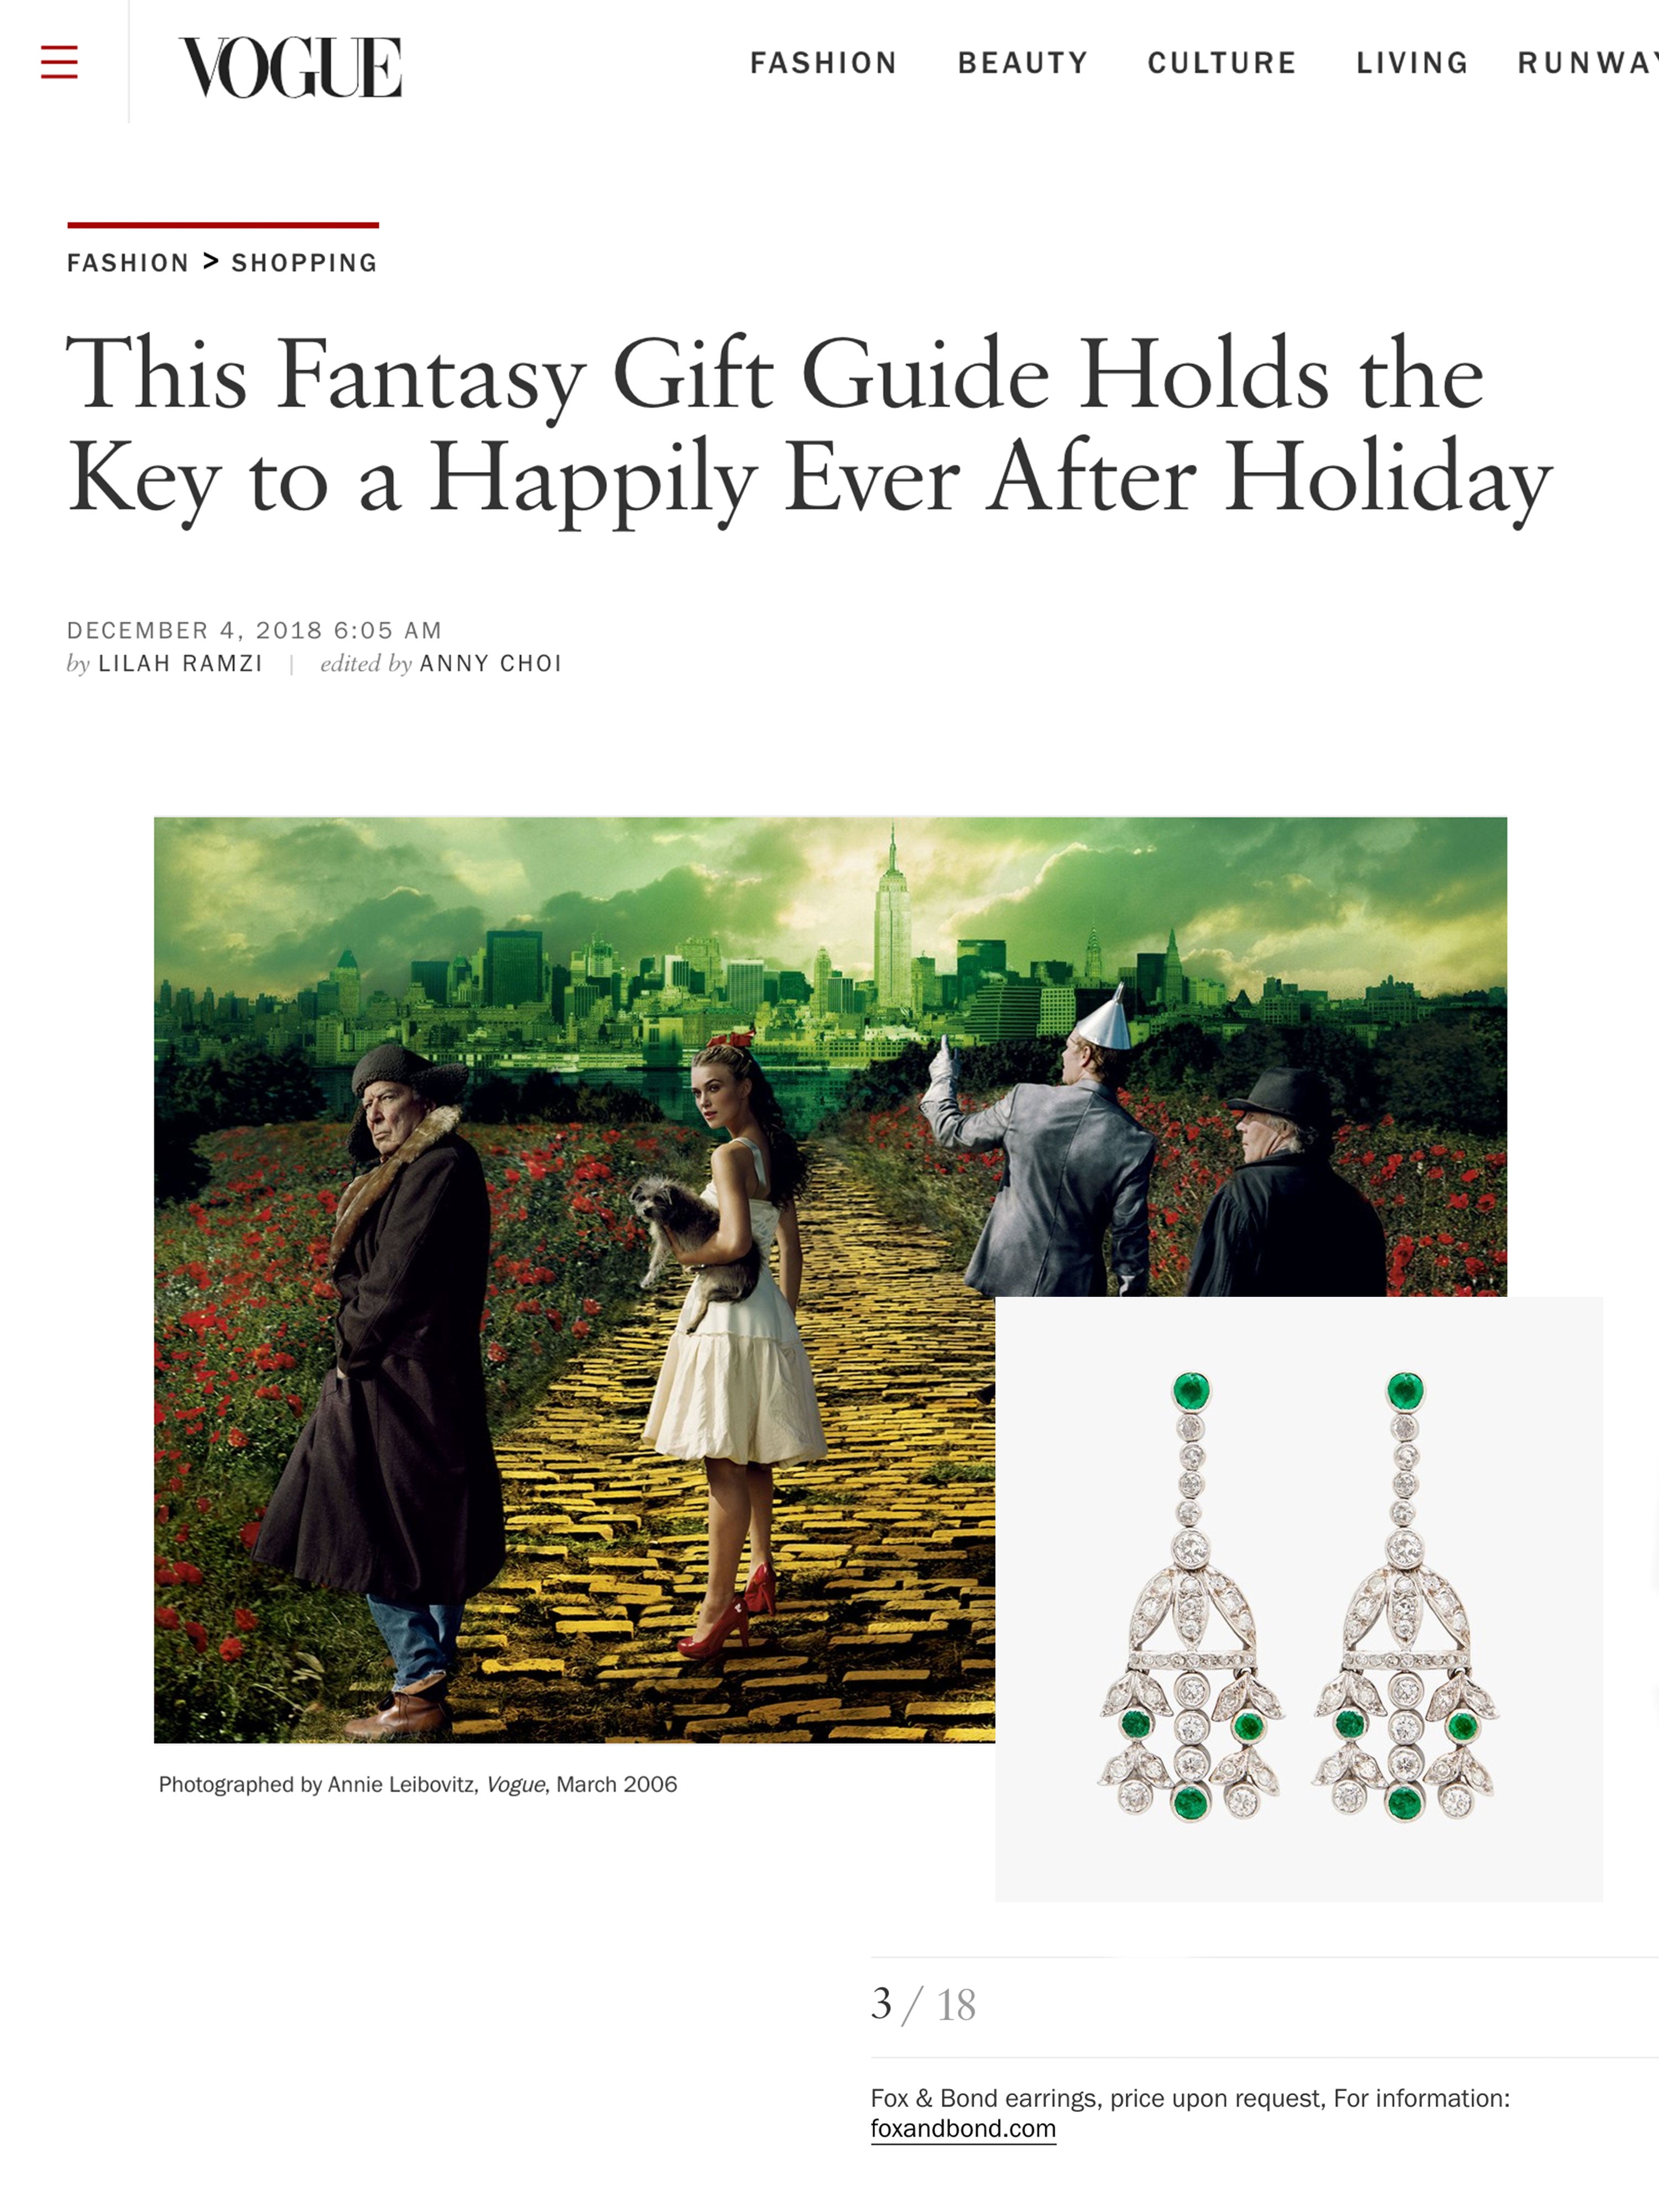 Vogue.com: This Fantasy Gift Guide Holds the Key to a Happily-Ever-After Holiday